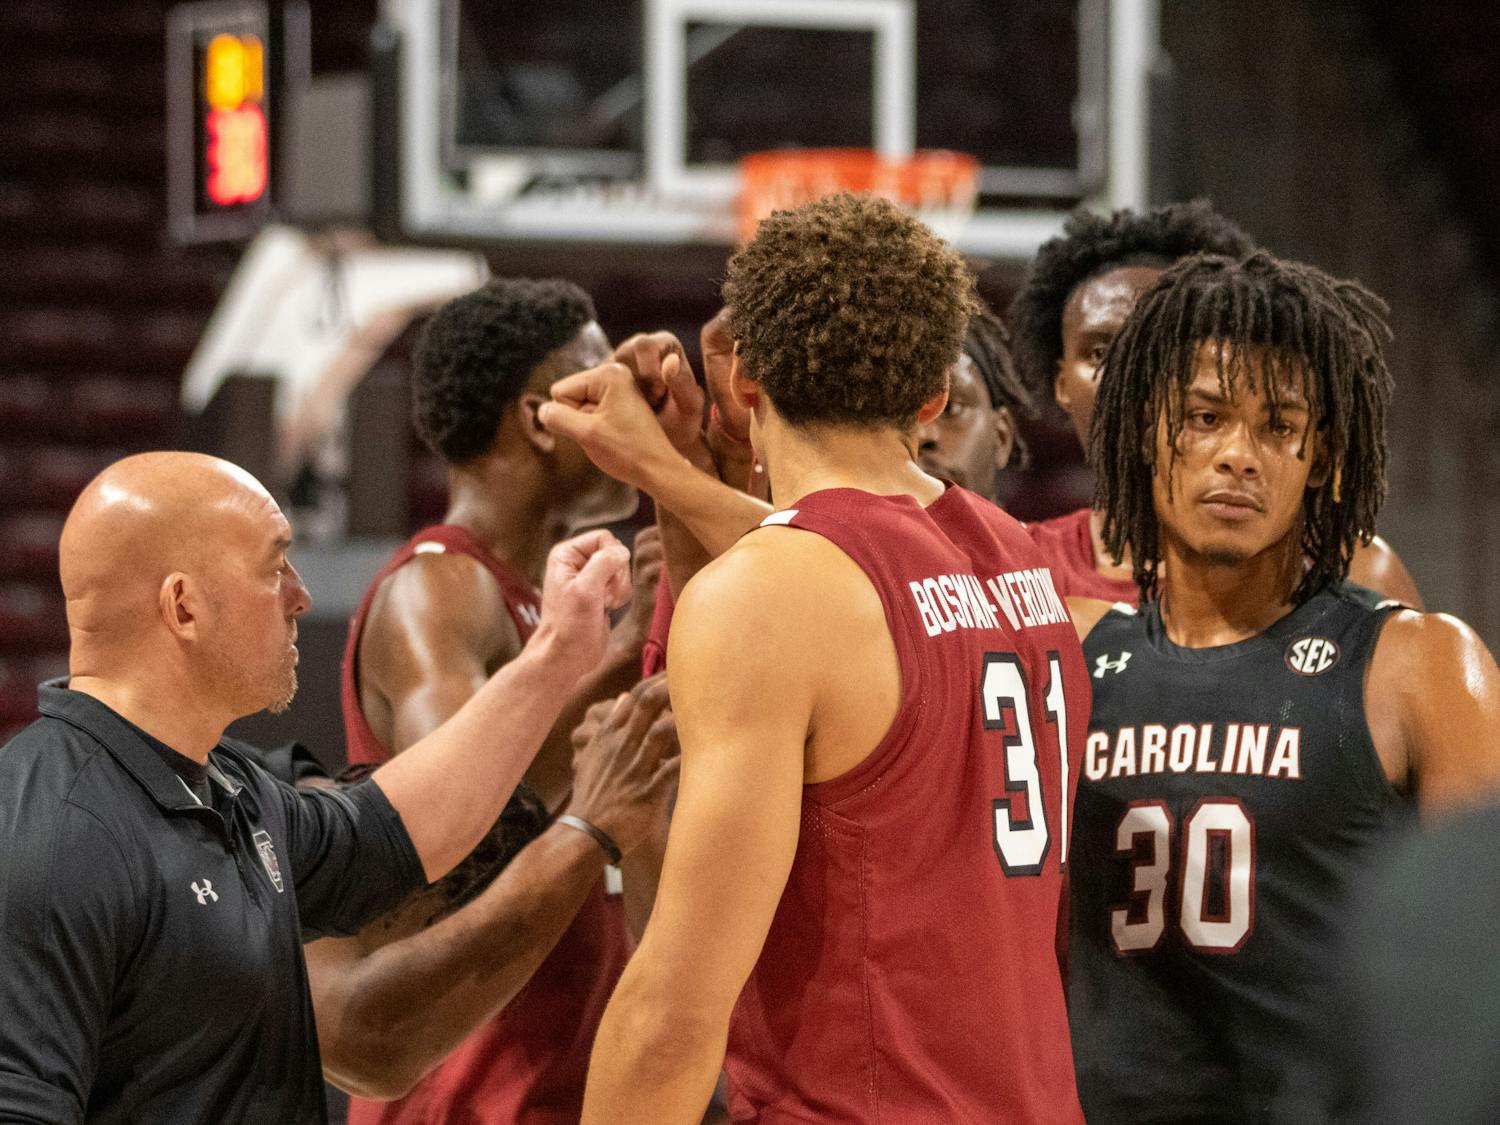 The Gamecocks huddle up before an intrasquad scrimmage on Oct. 26, 2022. The men's basketball team hosted the Garnet &amp; Black Madness event to prepare for the upcoming season.